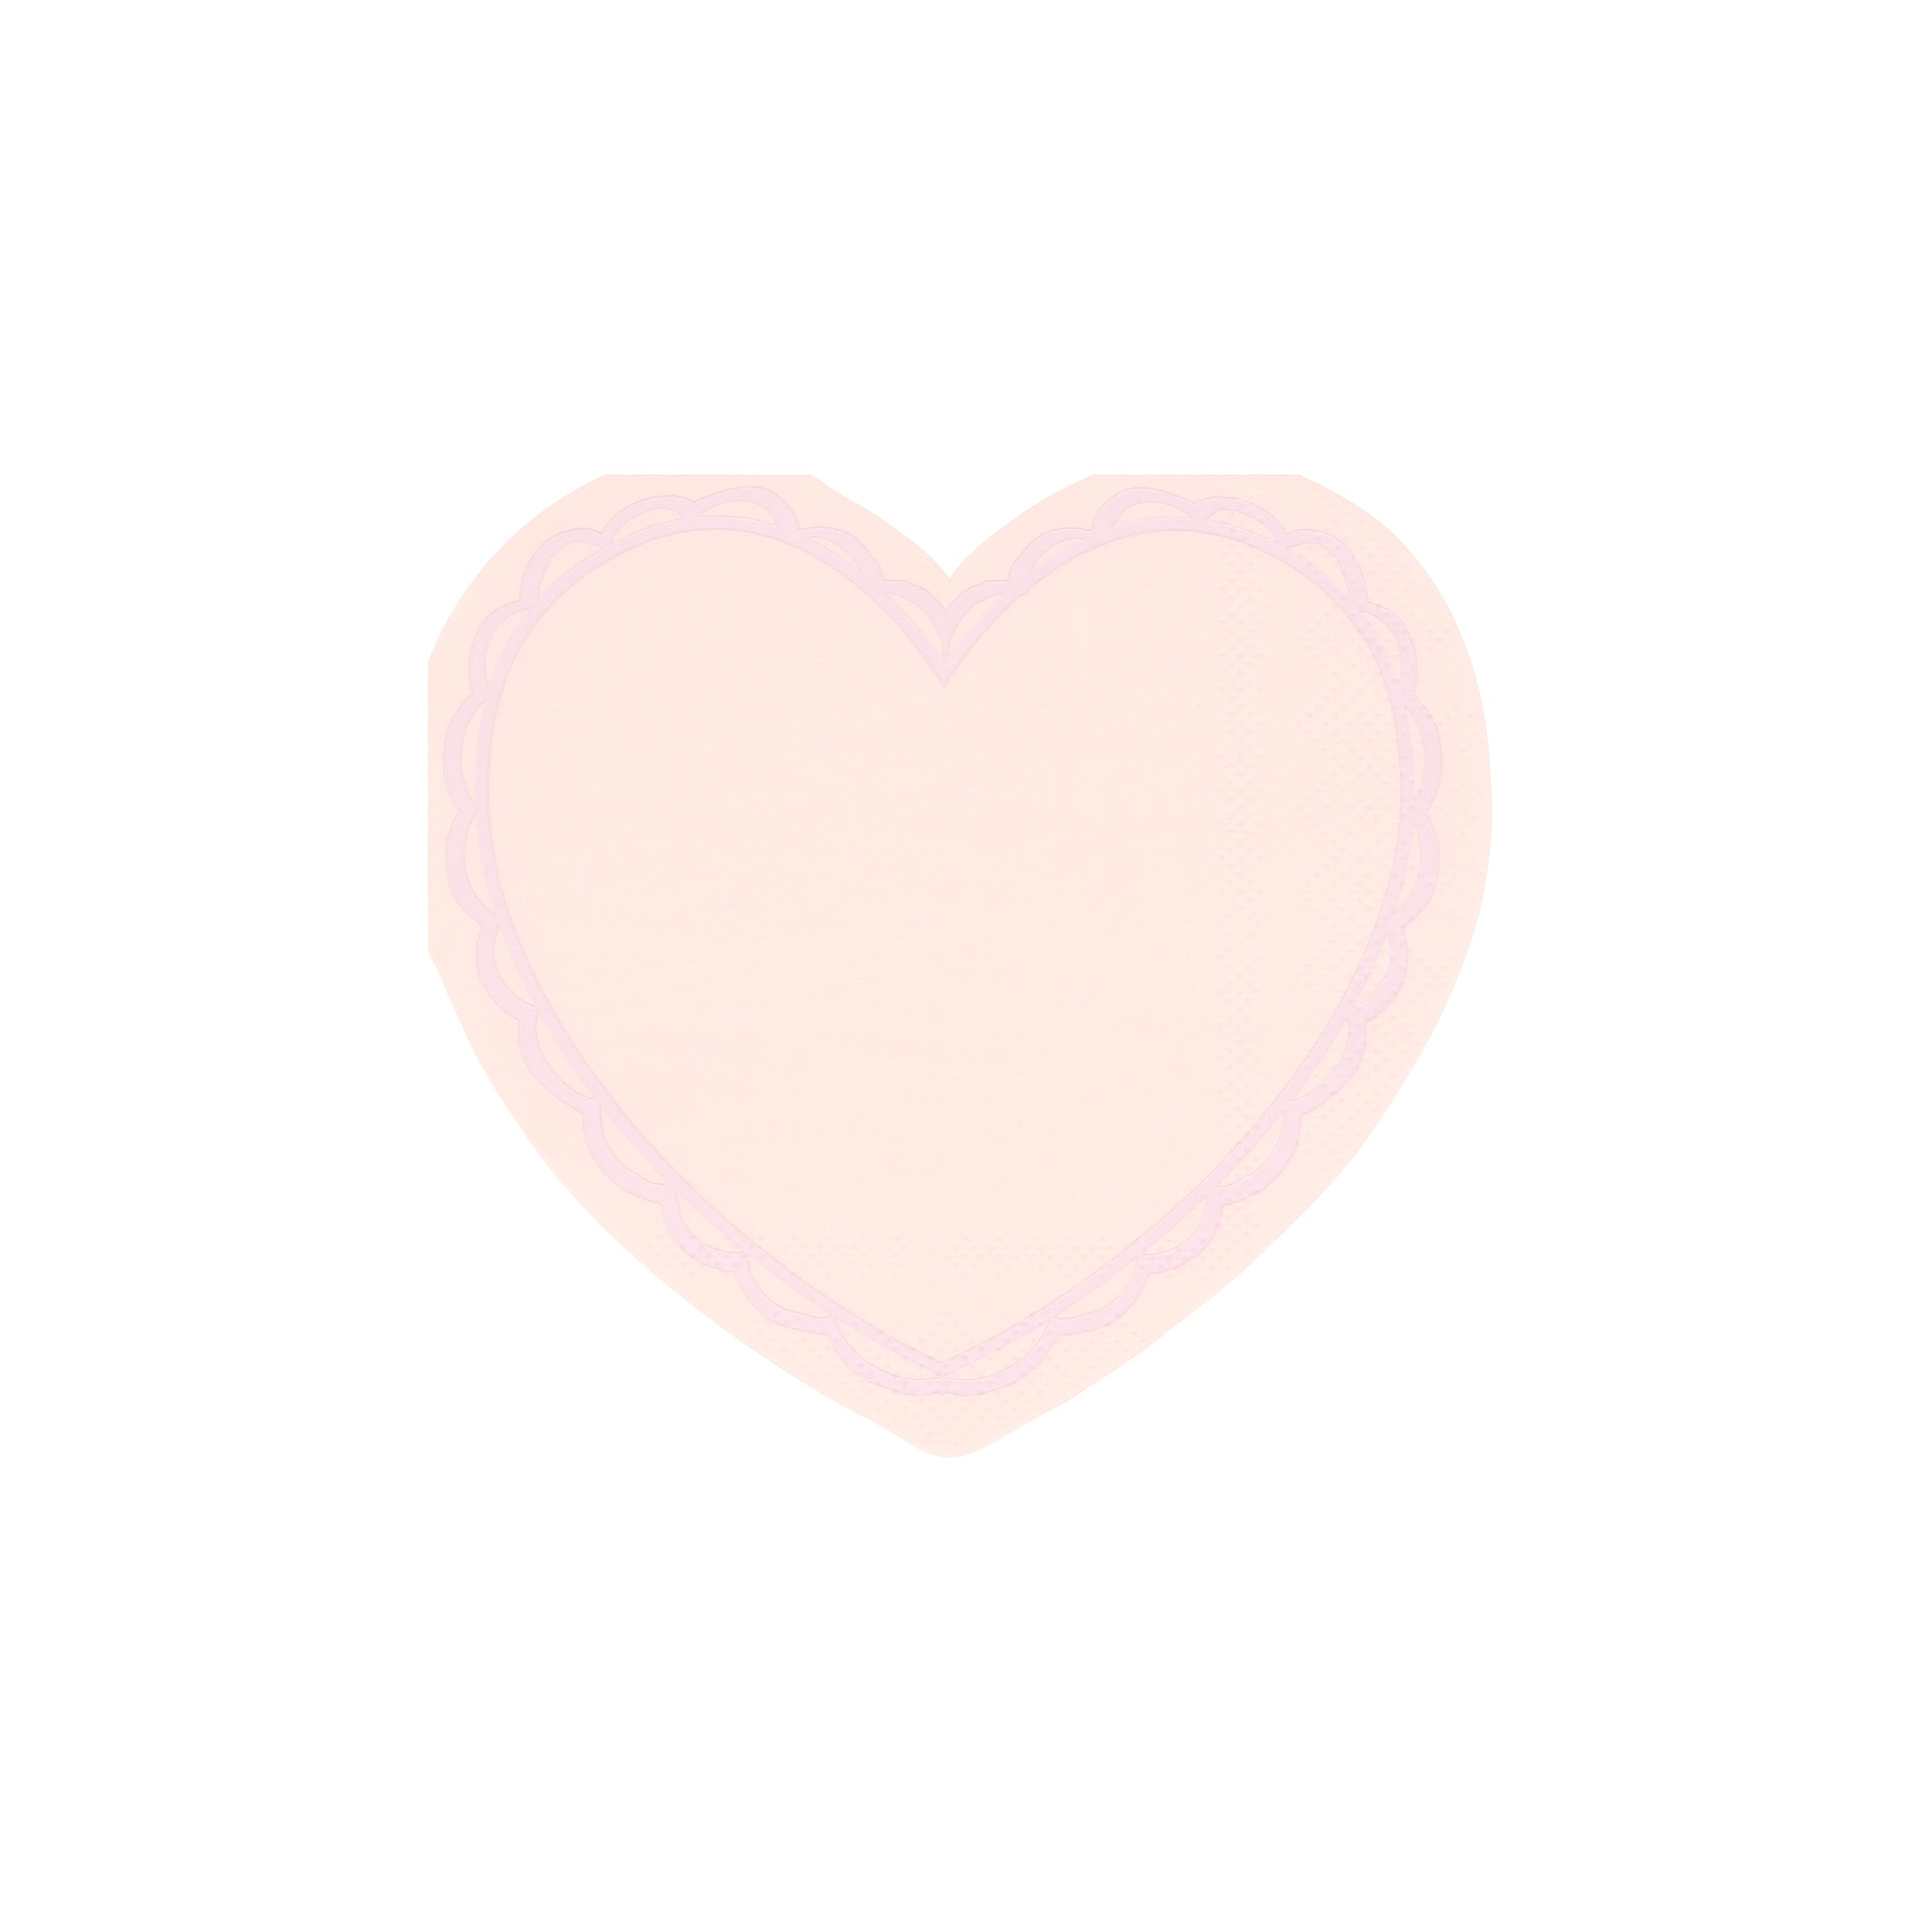 Our paper napkins, featuring pink napkins and other beautiful pastel shades, are heart shaped.